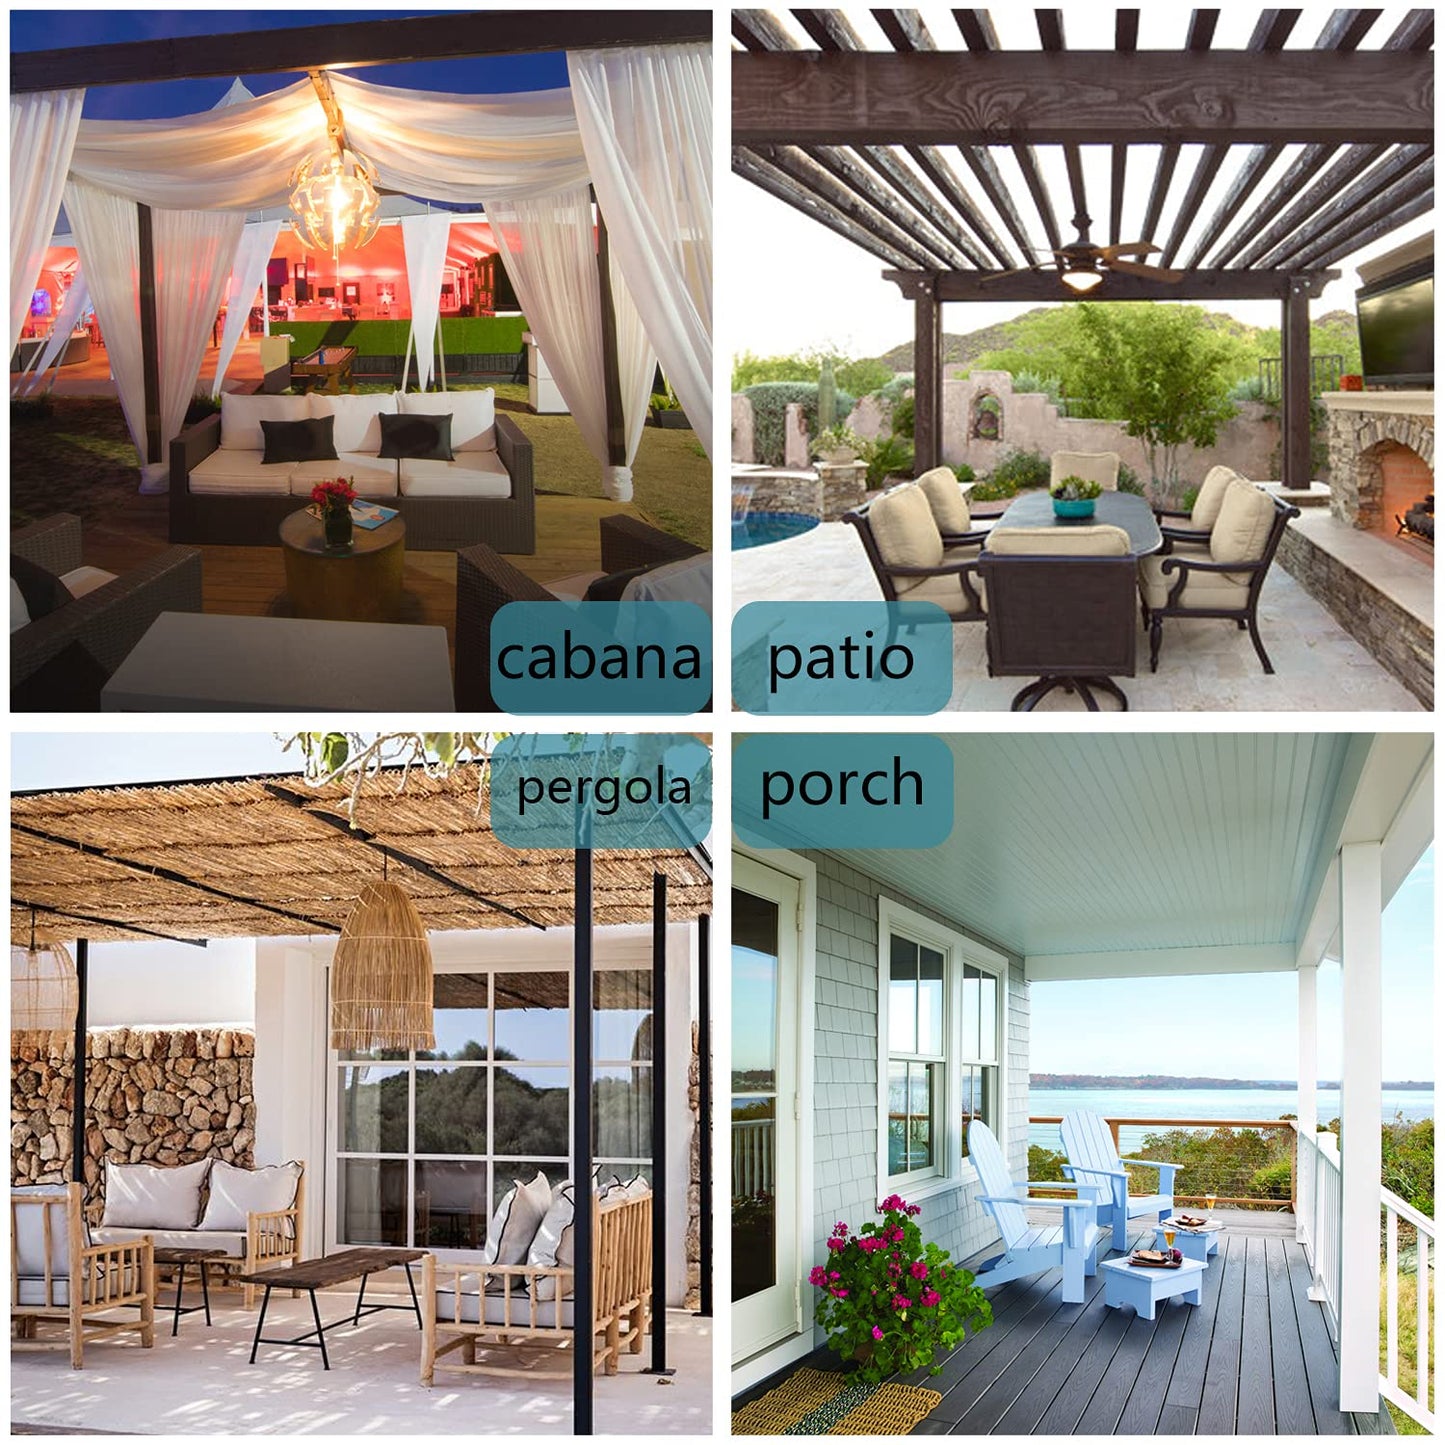 Boho Outdoor Curtains: Premium Waterproof Patio Curtains - Thick, Weatherproof, and Private - Perfect for Porch, Pergola, or Cabana - Explore Sizes and Colors!